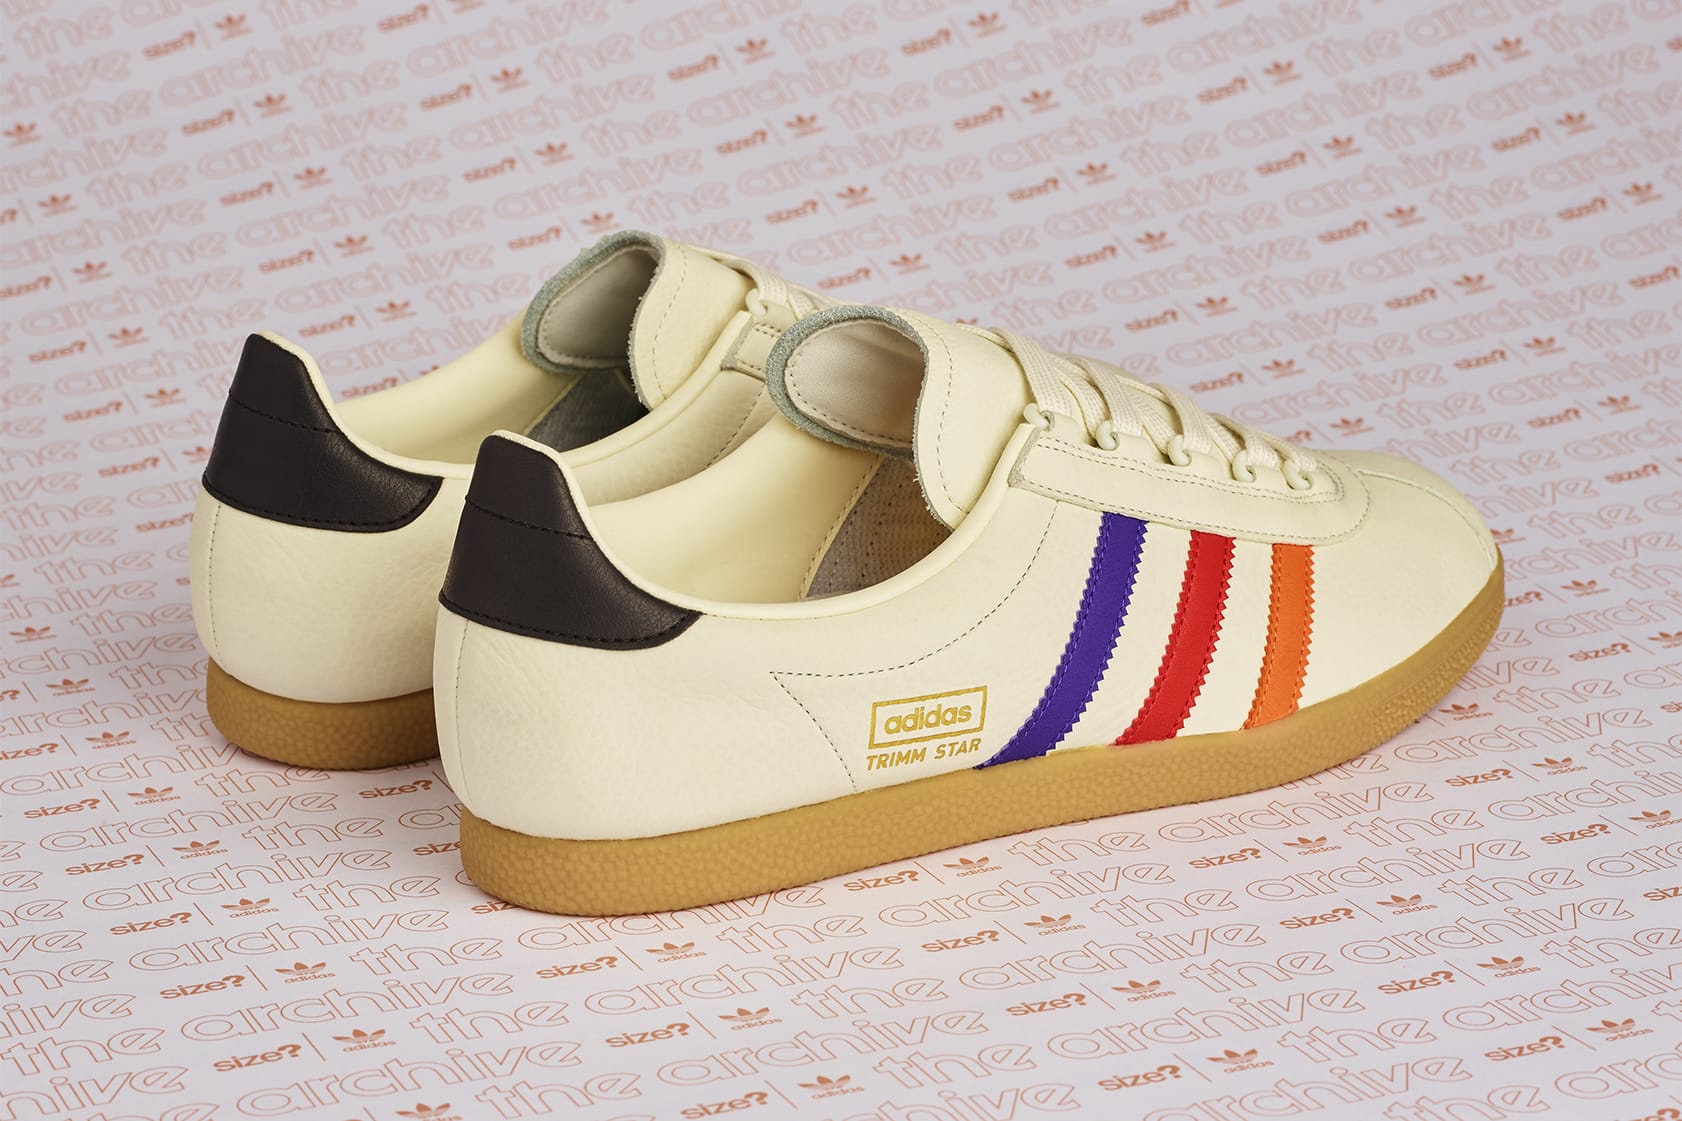 adidas trimm star new release